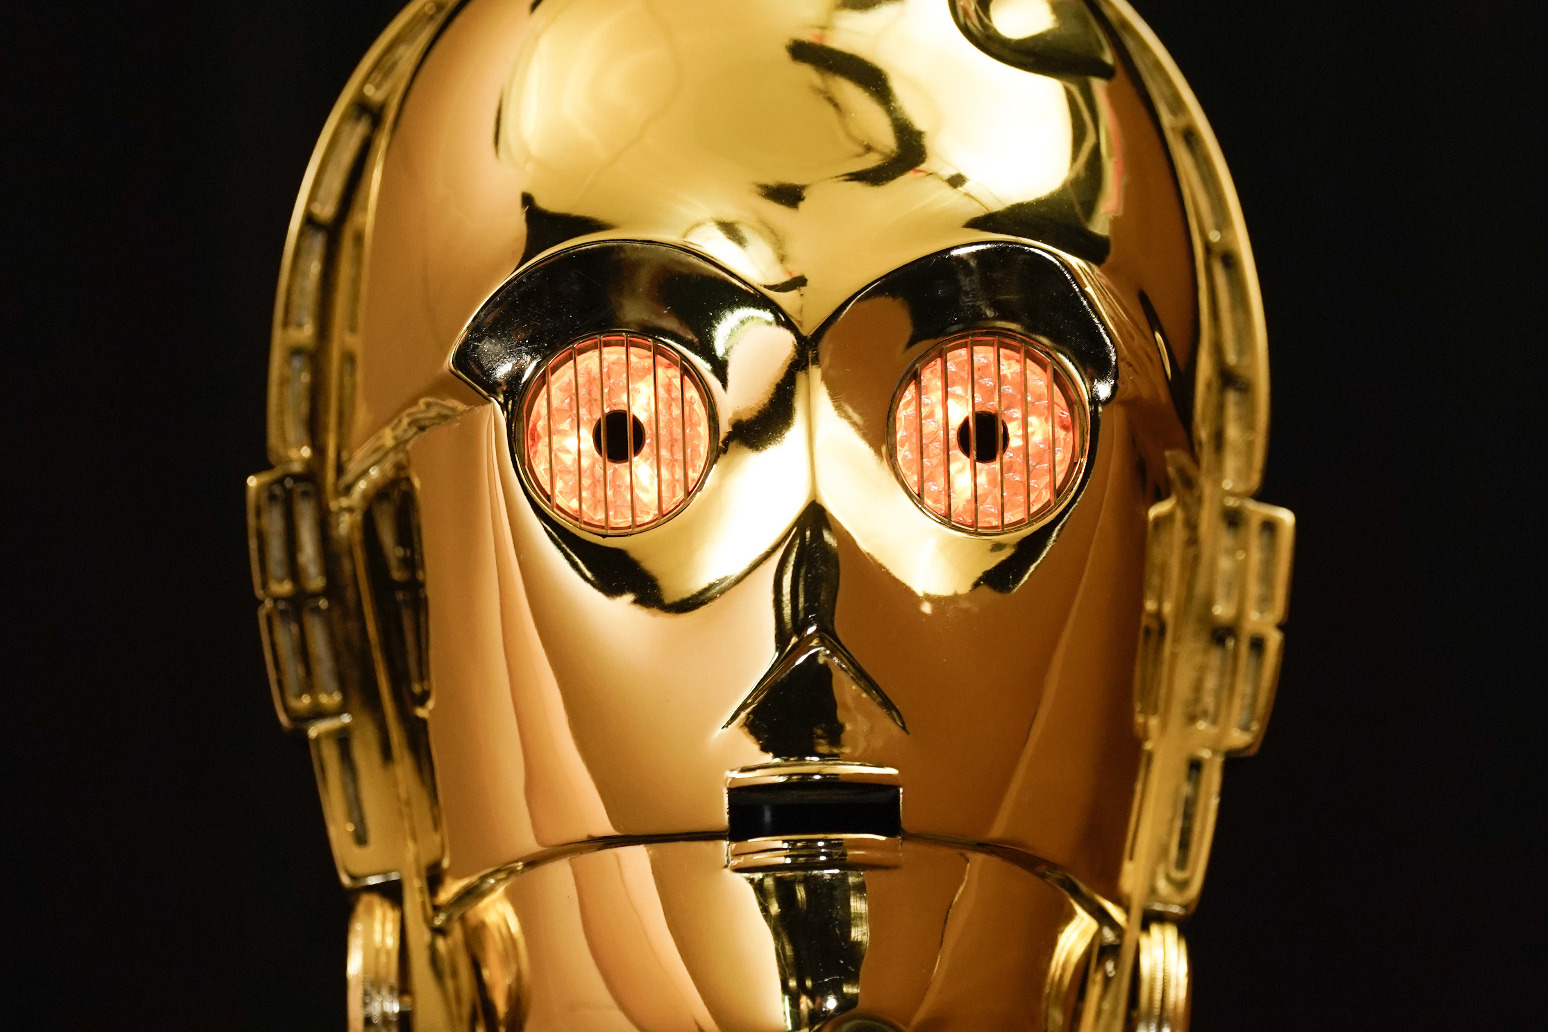 C-3PO head worn by Anthony Daniels in first Star Wars film to sell for up to £1m 